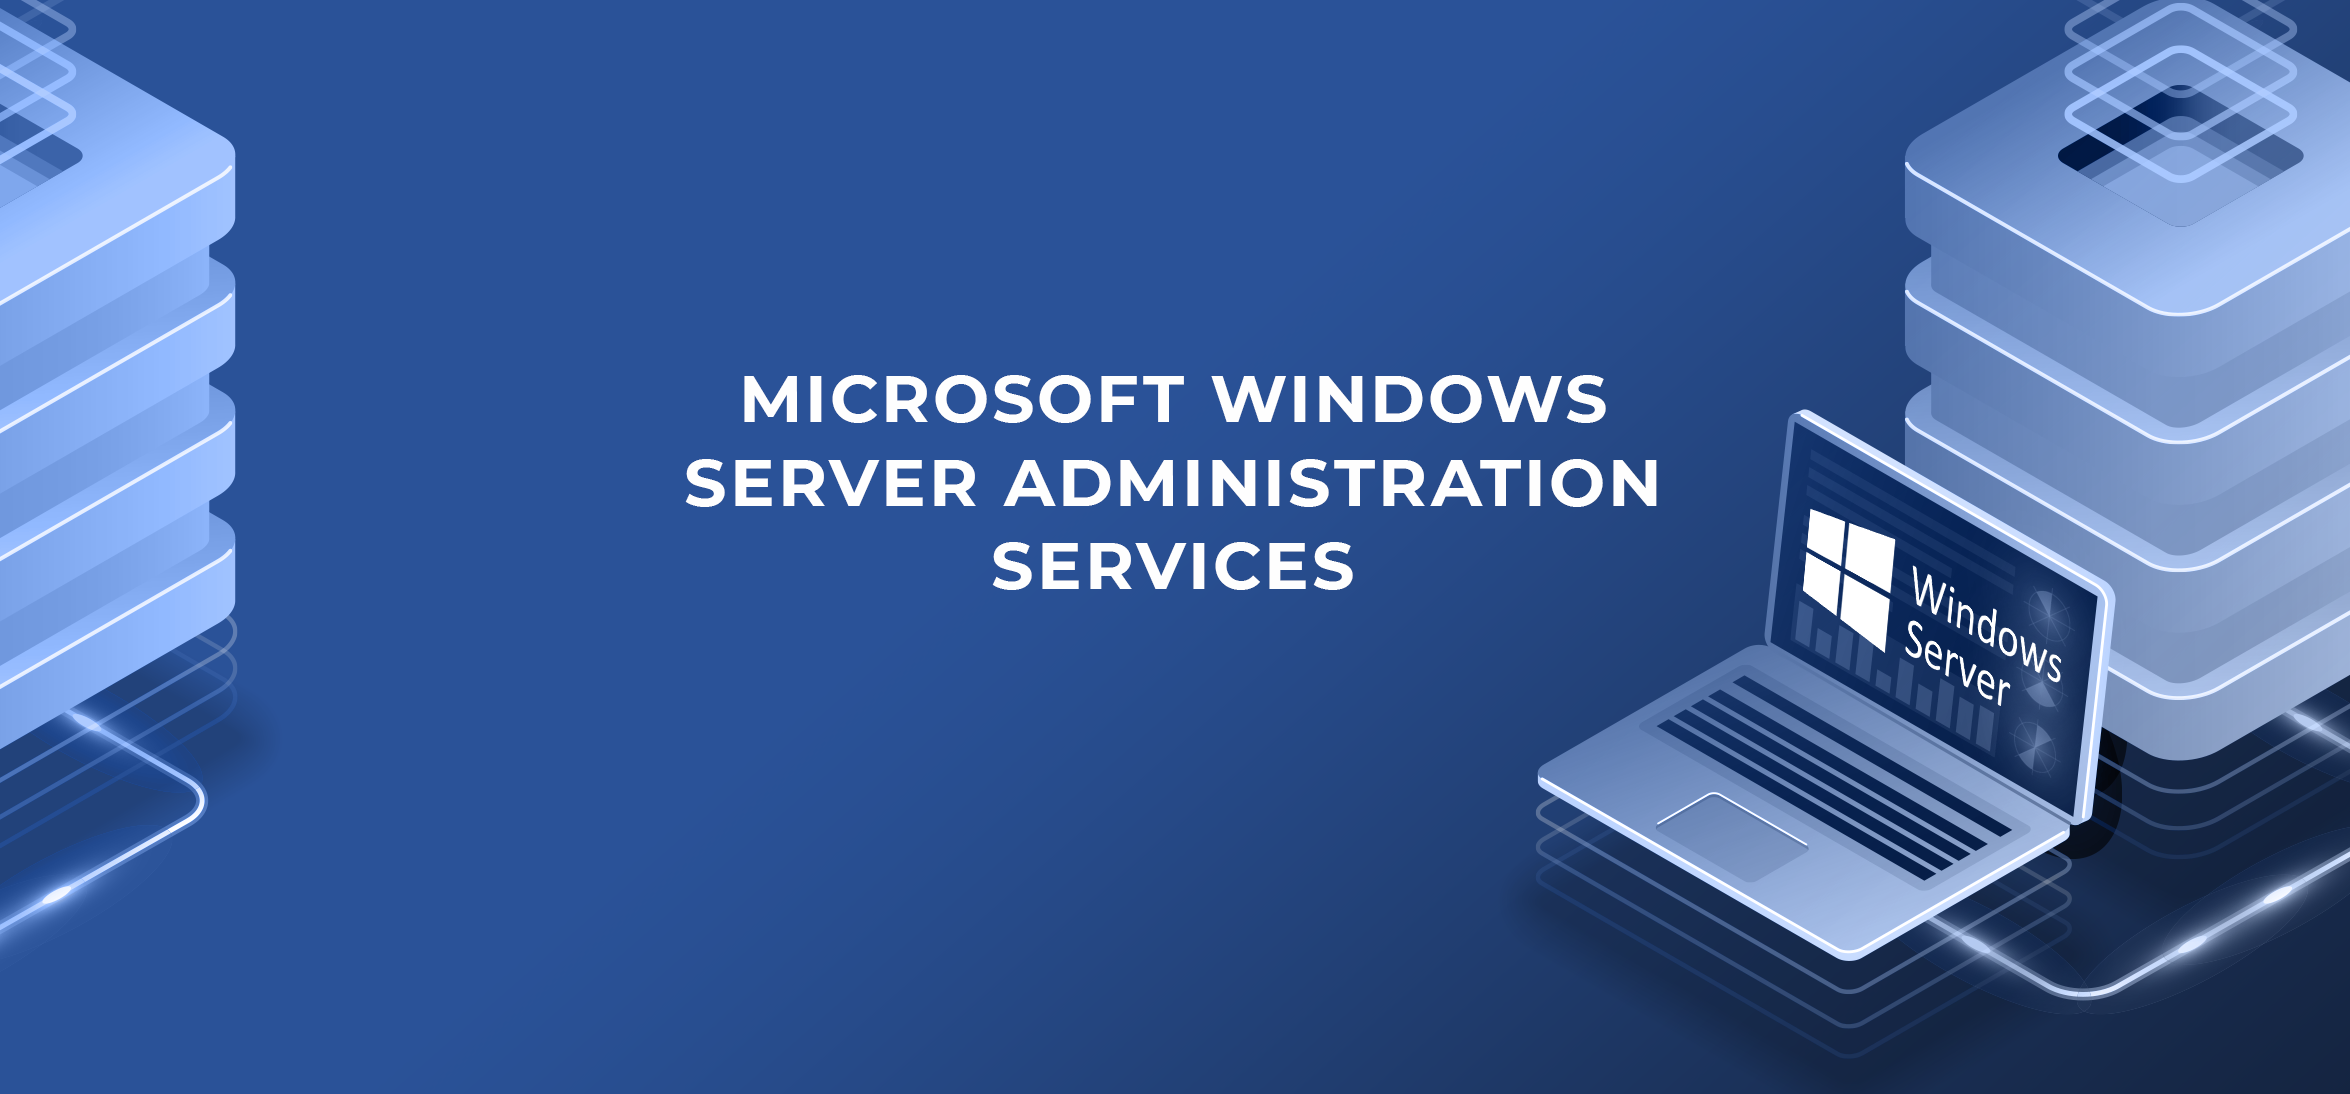 Effective Windows Server Administration and Support Solution Provider in Bayonne NJ, 07002